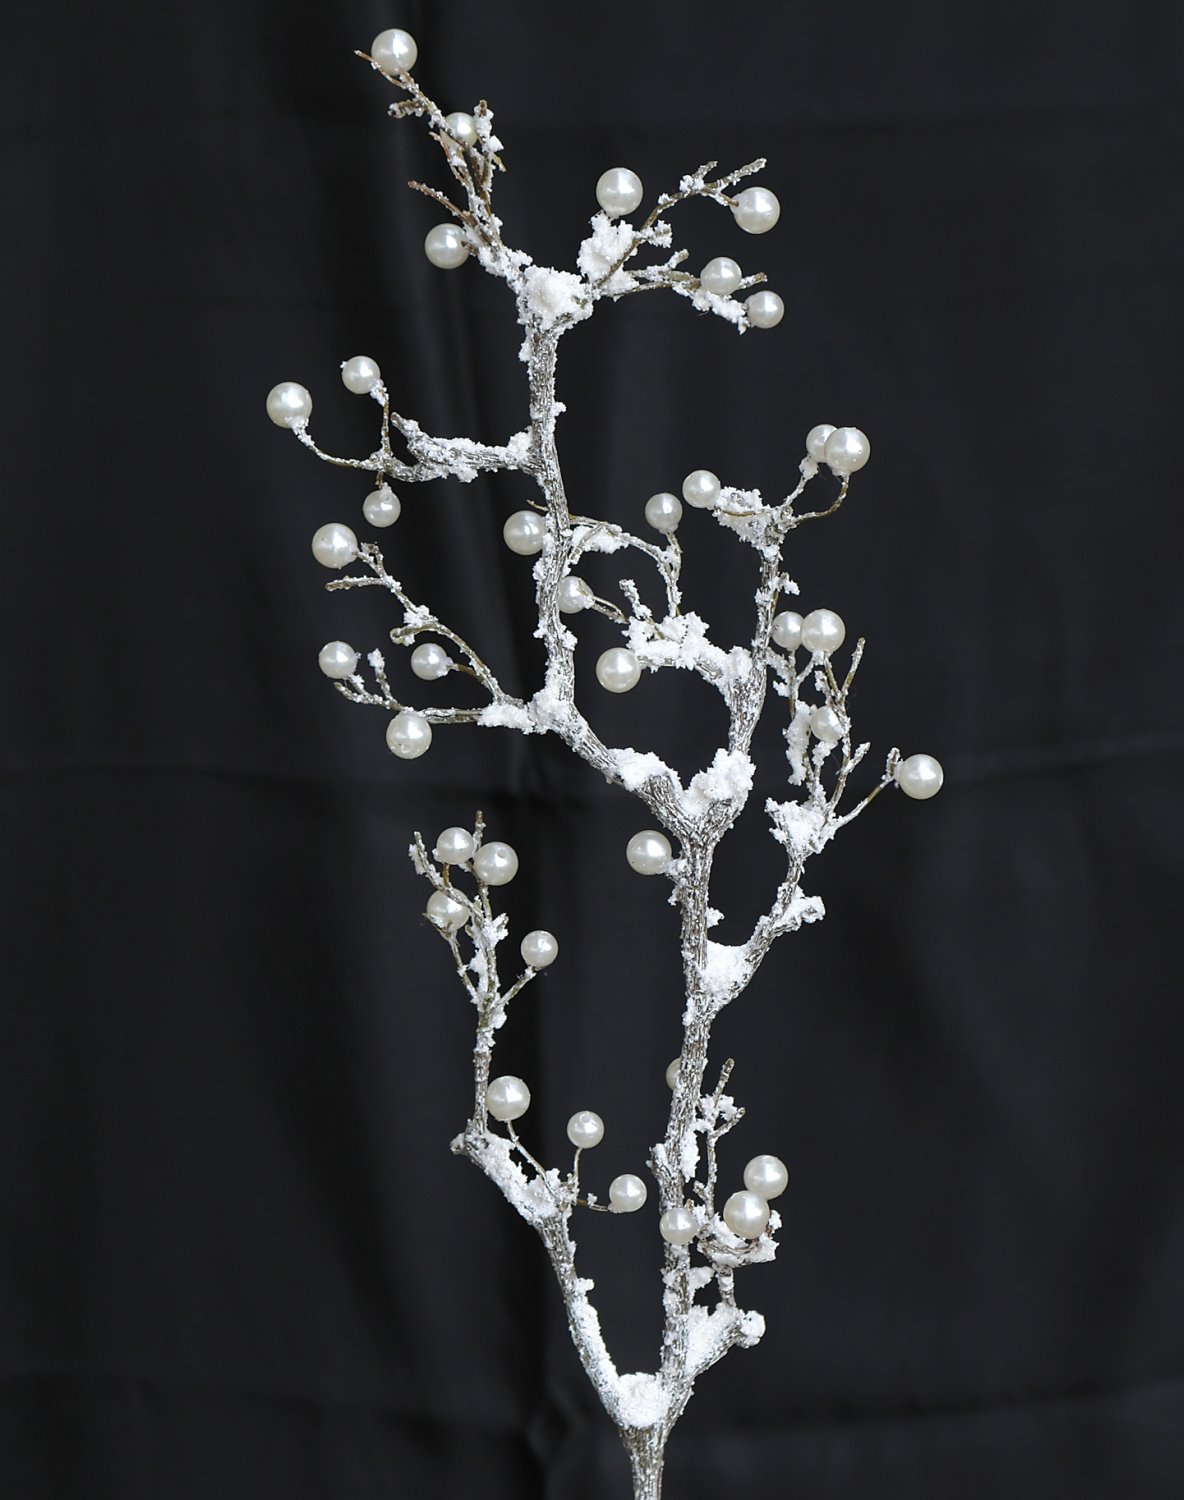 Artificial plant spray with pearls and snow, 83 cm, frosted brown